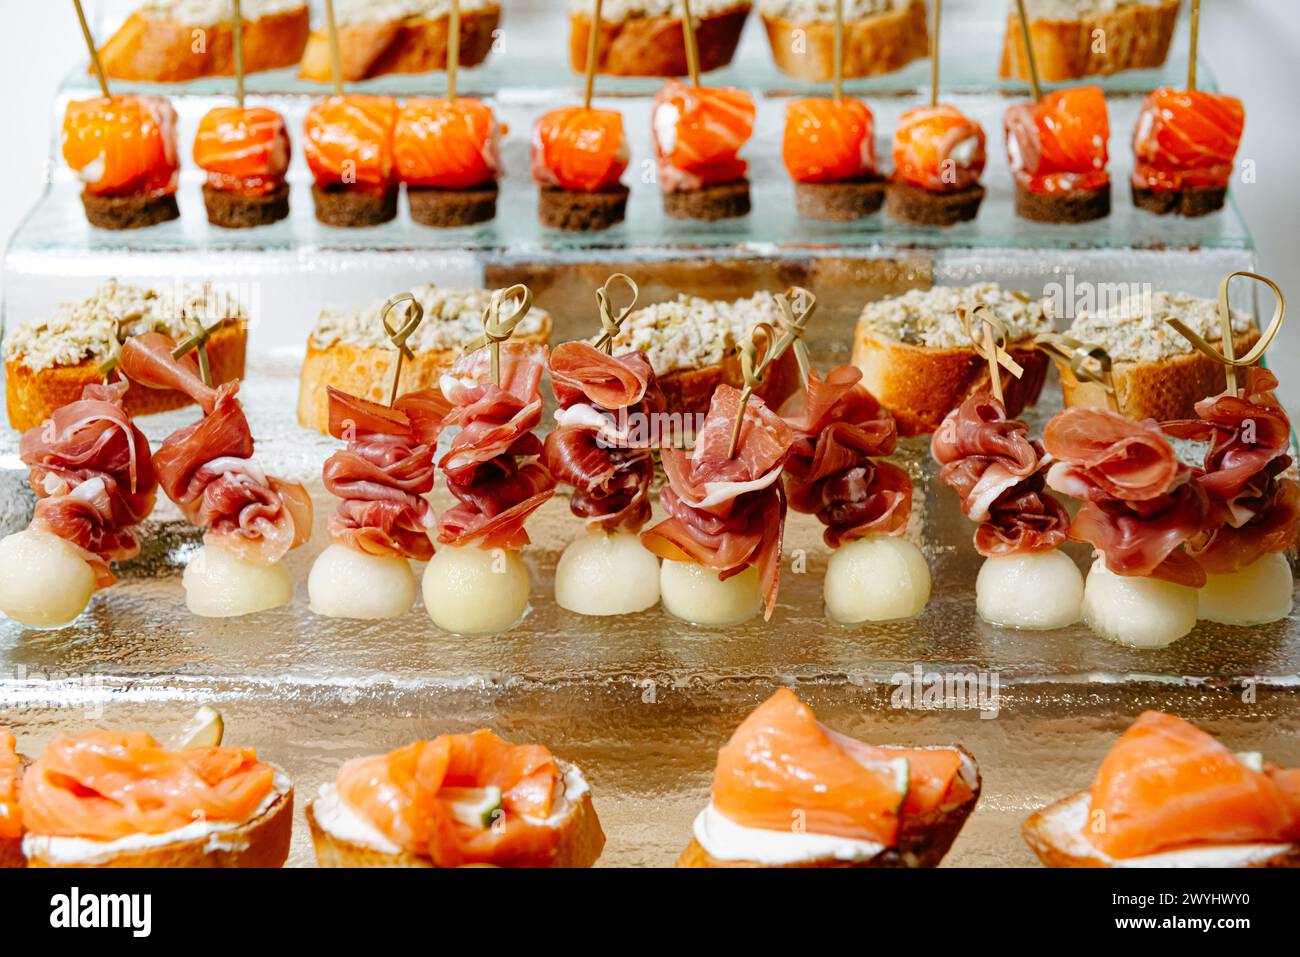 A luxurious selection of canapés featuring smoked salmon on toast, prosciutto with melon, and tuna spread, perfect for high-end catering and events. Stock Photo